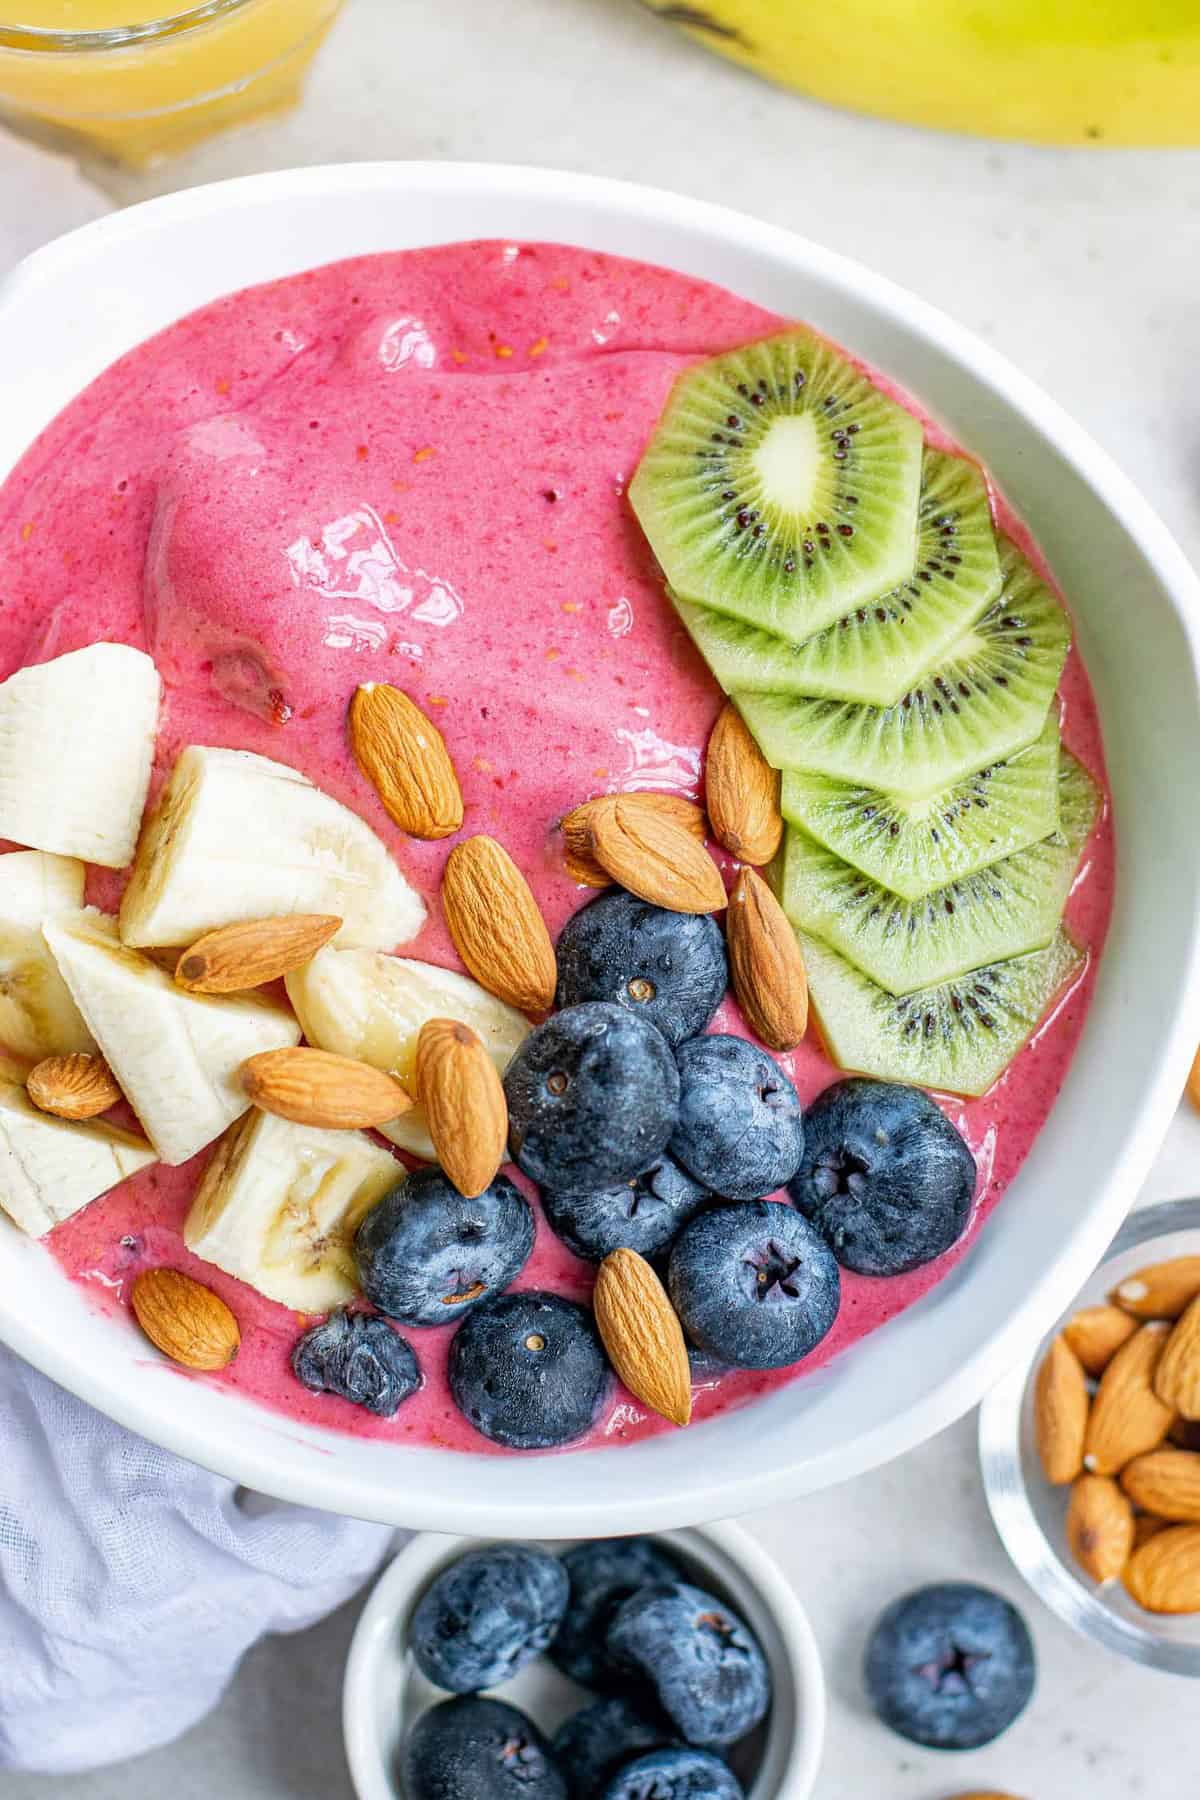 Raspberry smoothie bowl with toppings.